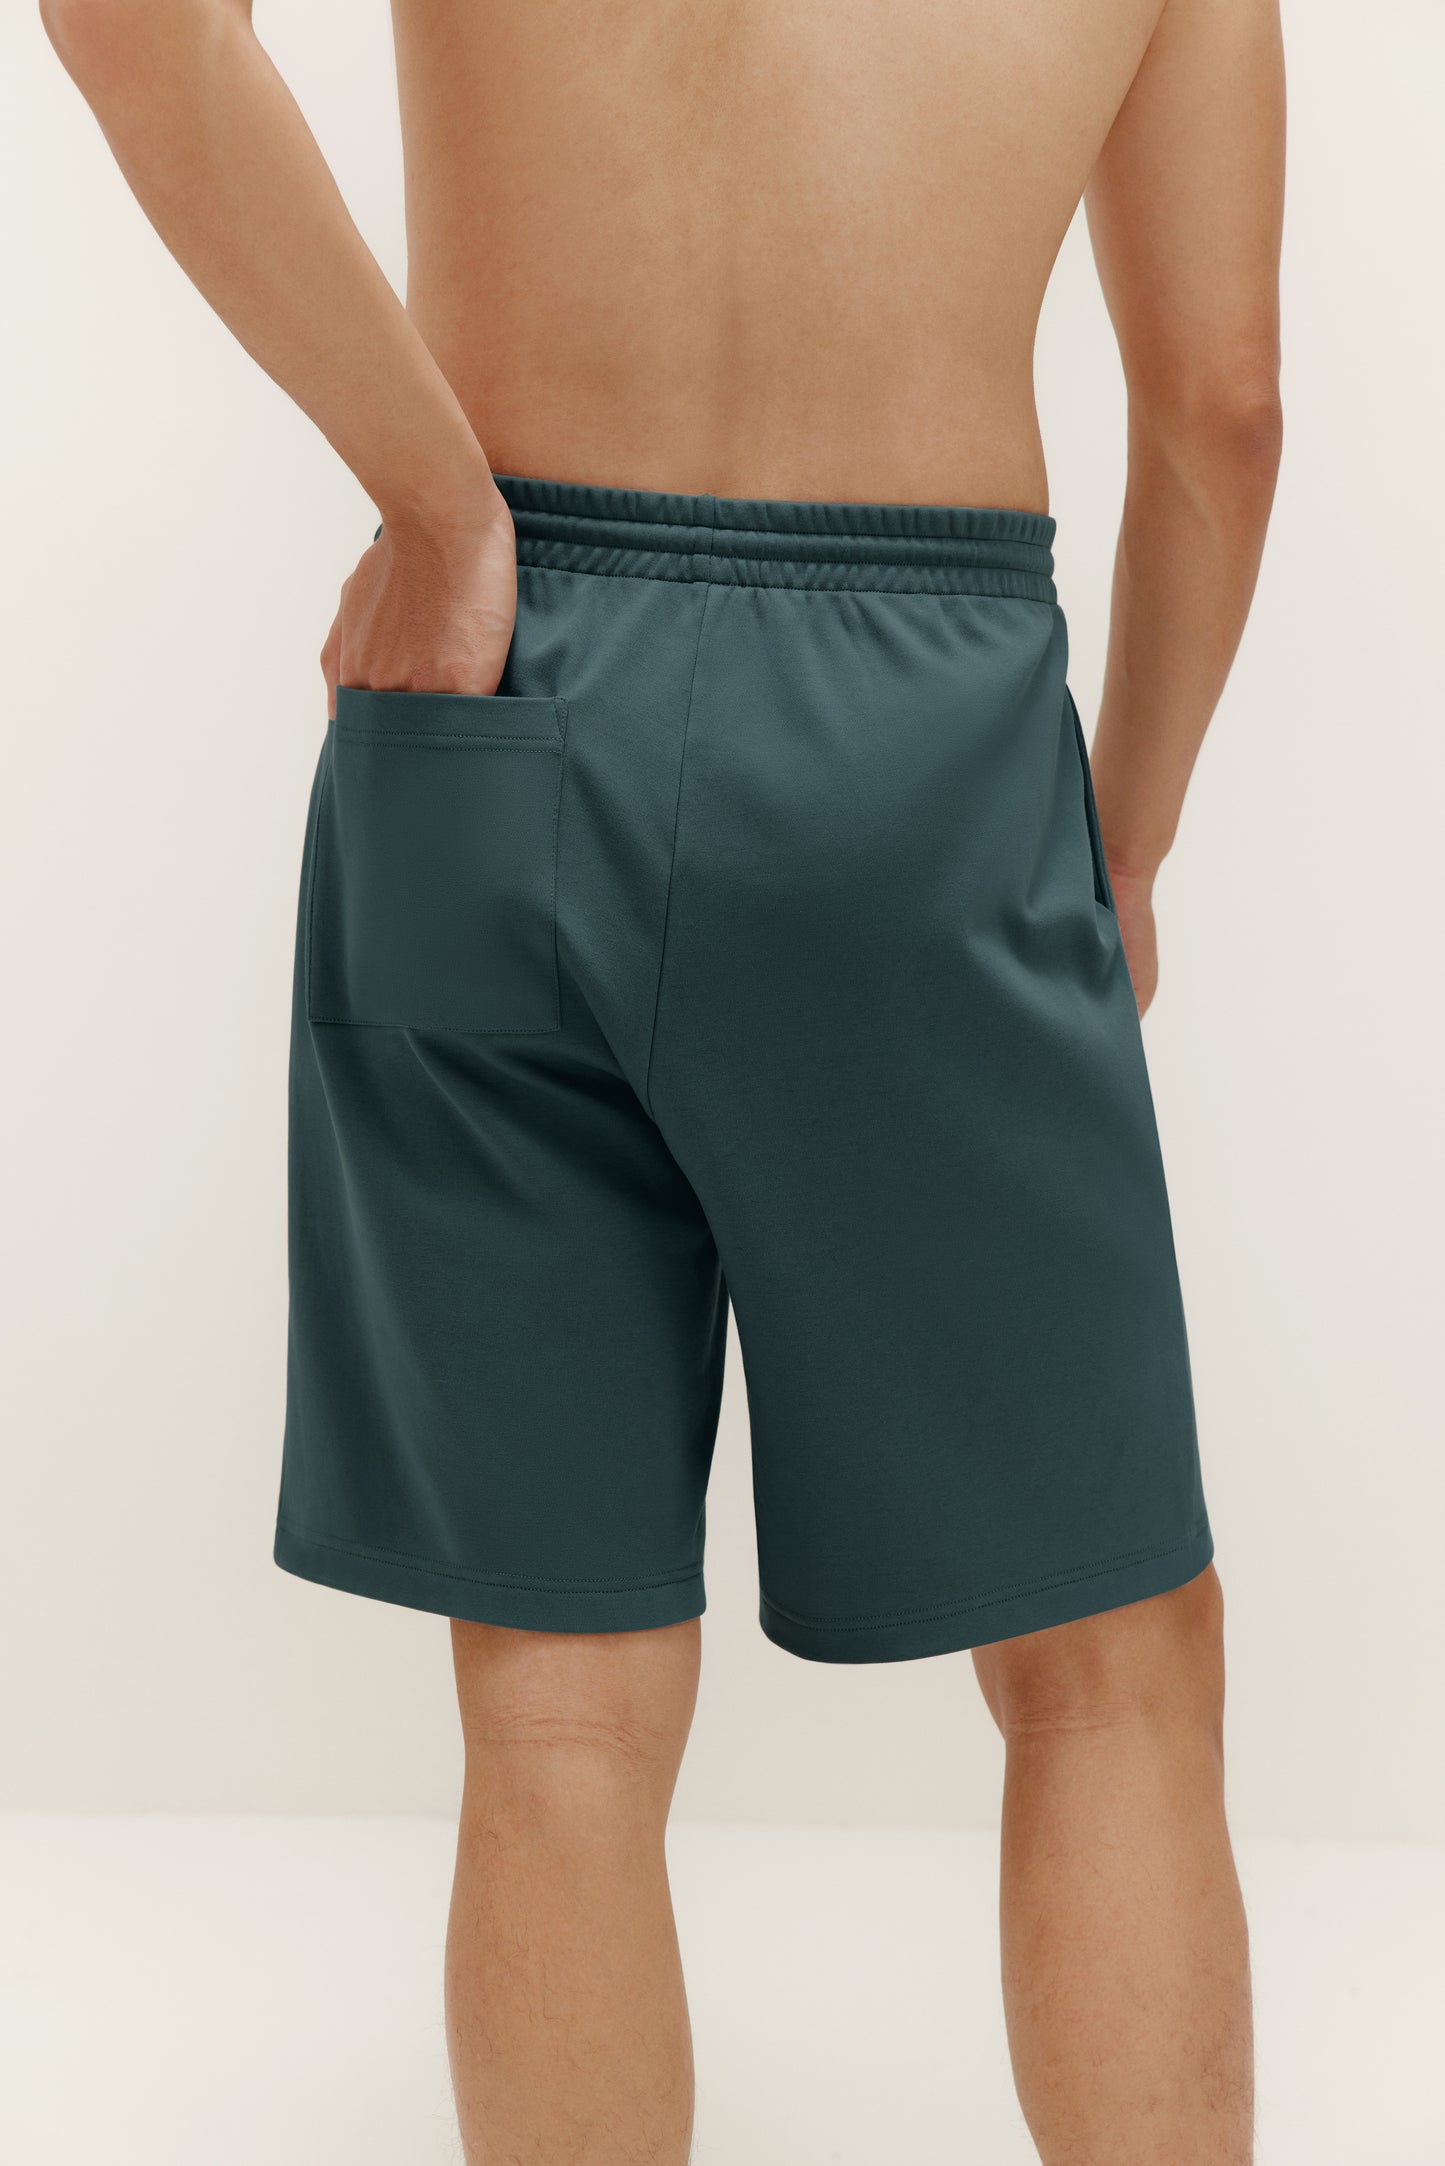 back of man in green shorts